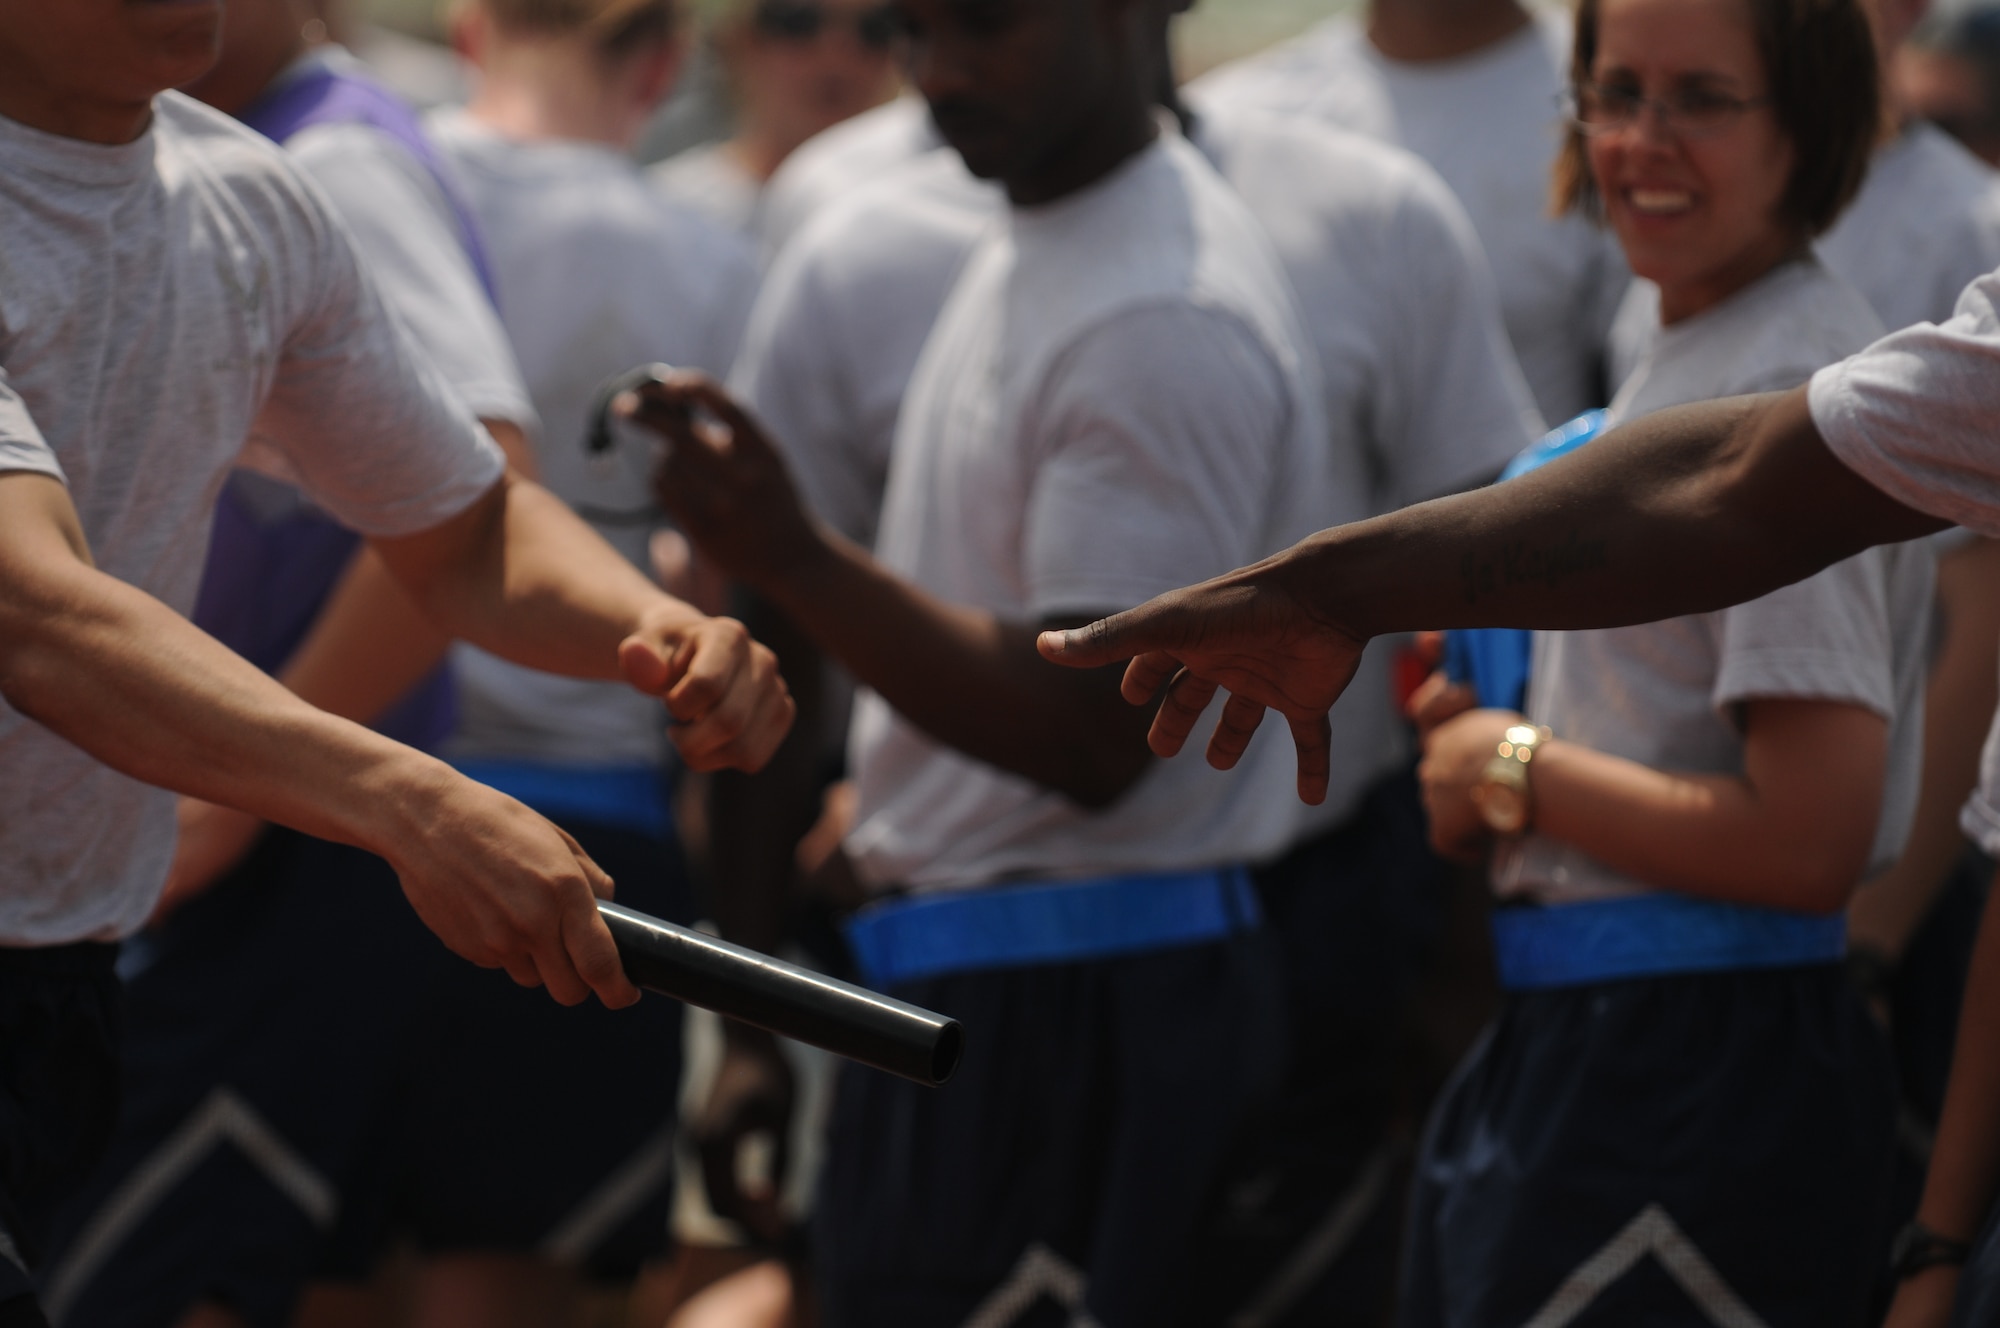 GOODFELLOW AIR FORCE BASE, Texas -- A baton is passed during a one mile relay race May 27. Team Goodfellow devoted the day to safety and sports to kick off the 101 critical days of summer. (U.S. Air Force photo/Staff Sgt. Heather L Rodgers) 